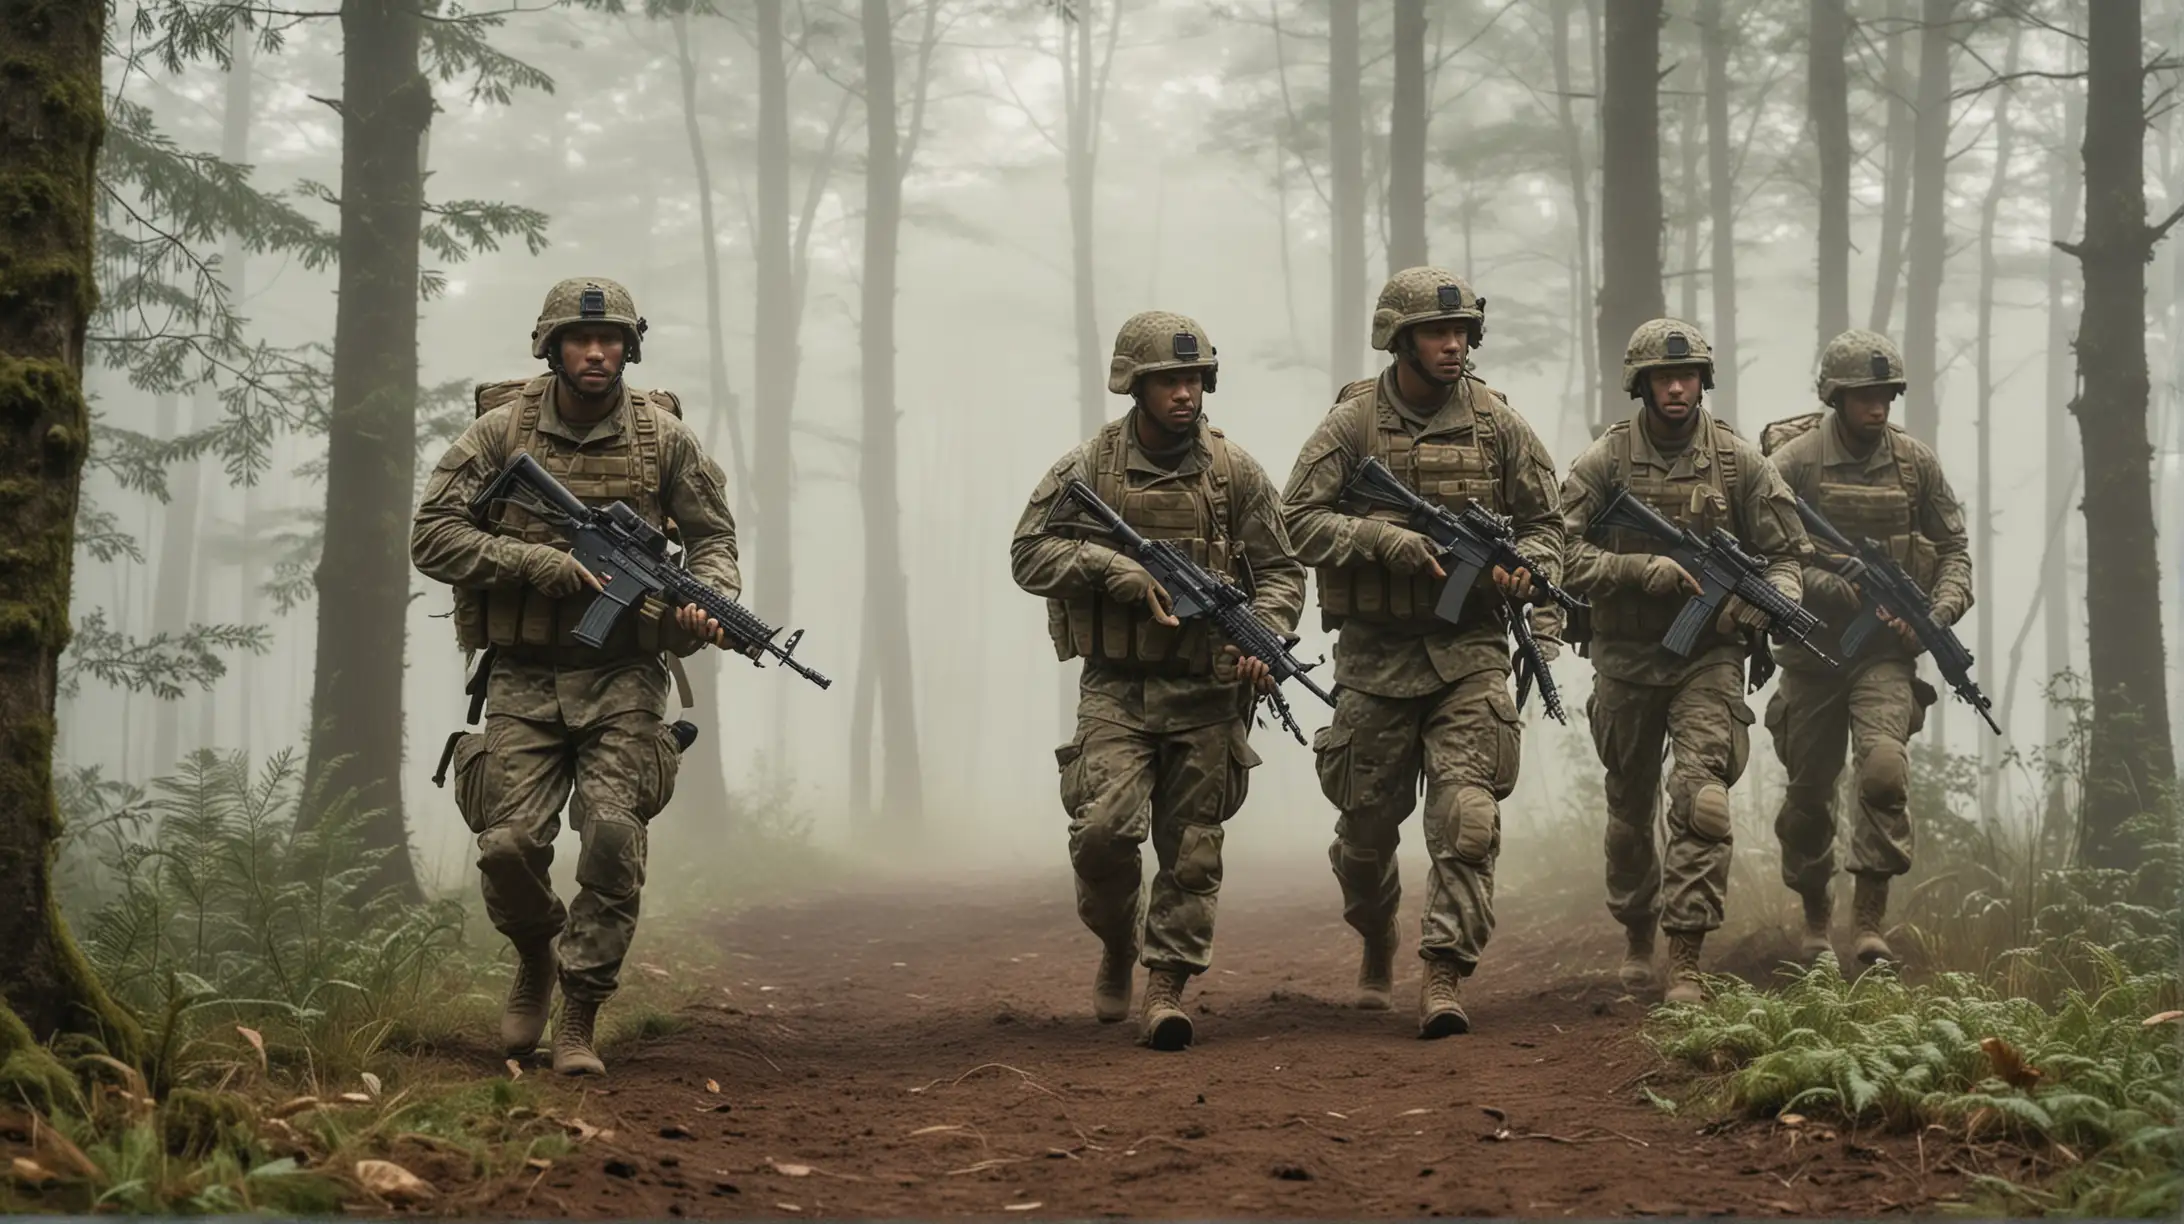 Five different and diverse modern army soldiers marching, wearing multicam and helmets, carrying small arms, surrounded by trees in very foggy forest at daytime